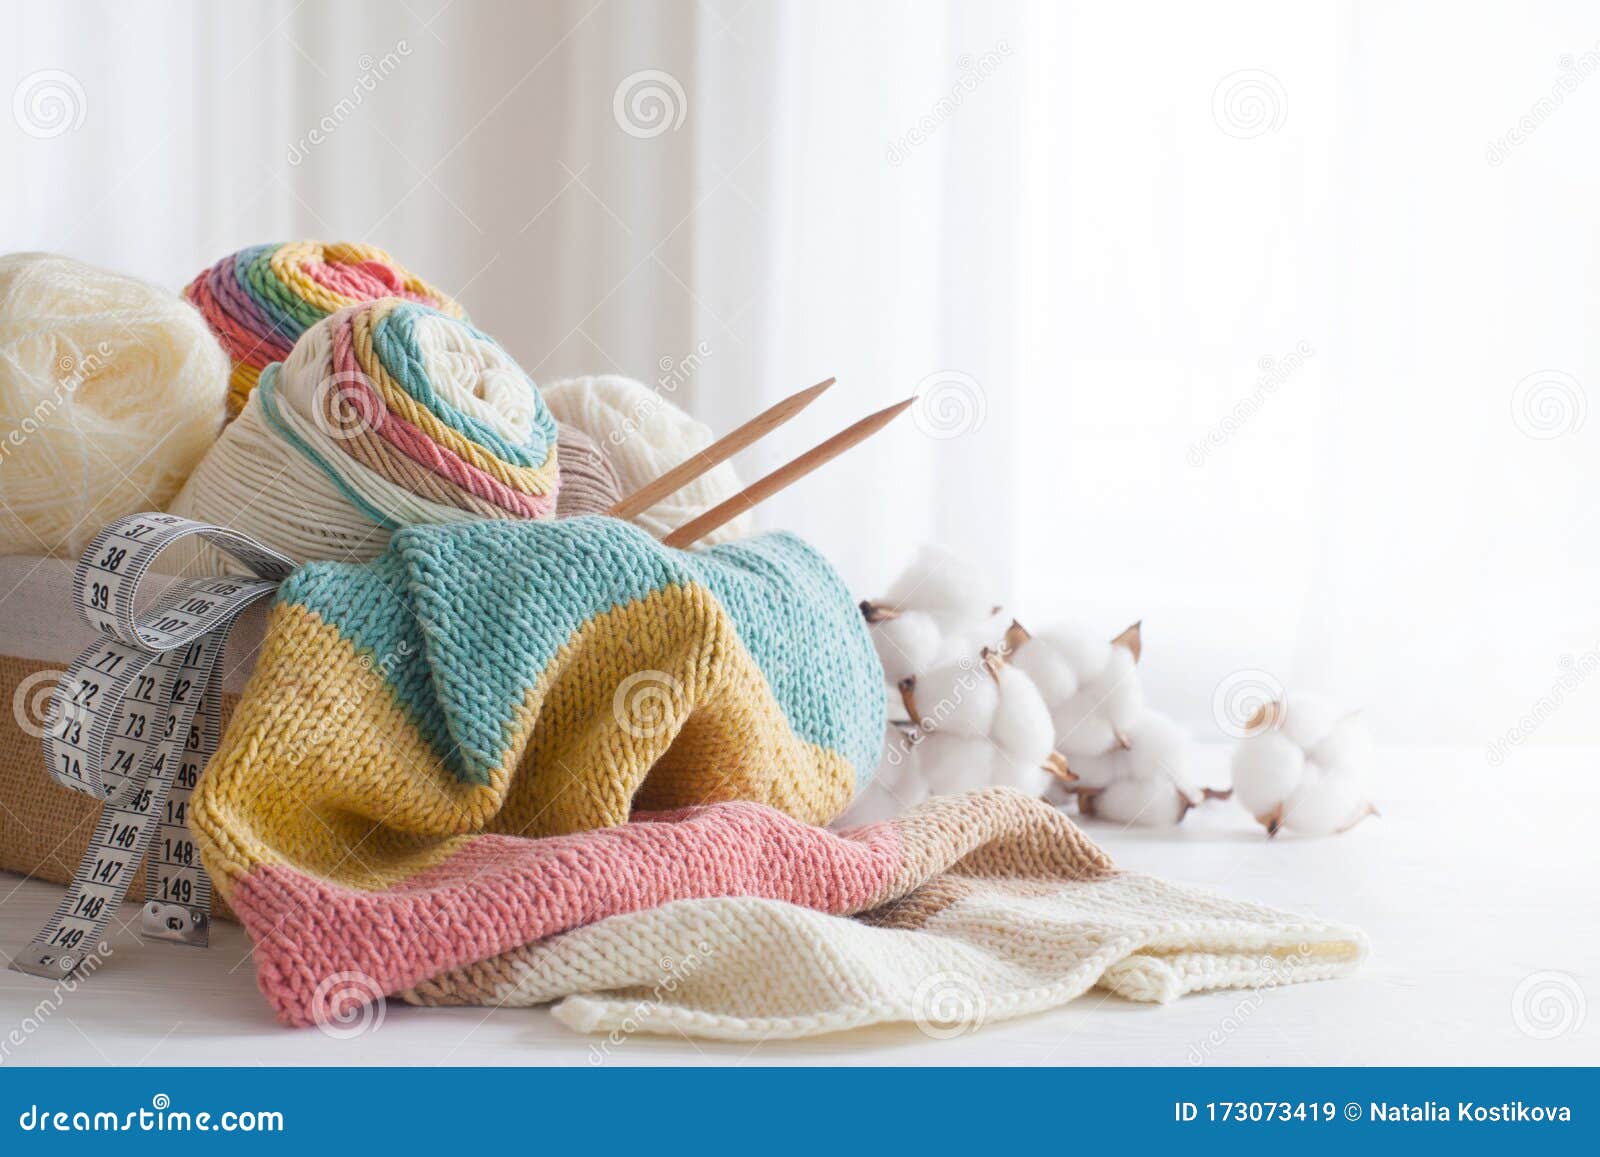 knitting wool and knitting needles in pastel colors on white background. cotton bolls. copy space